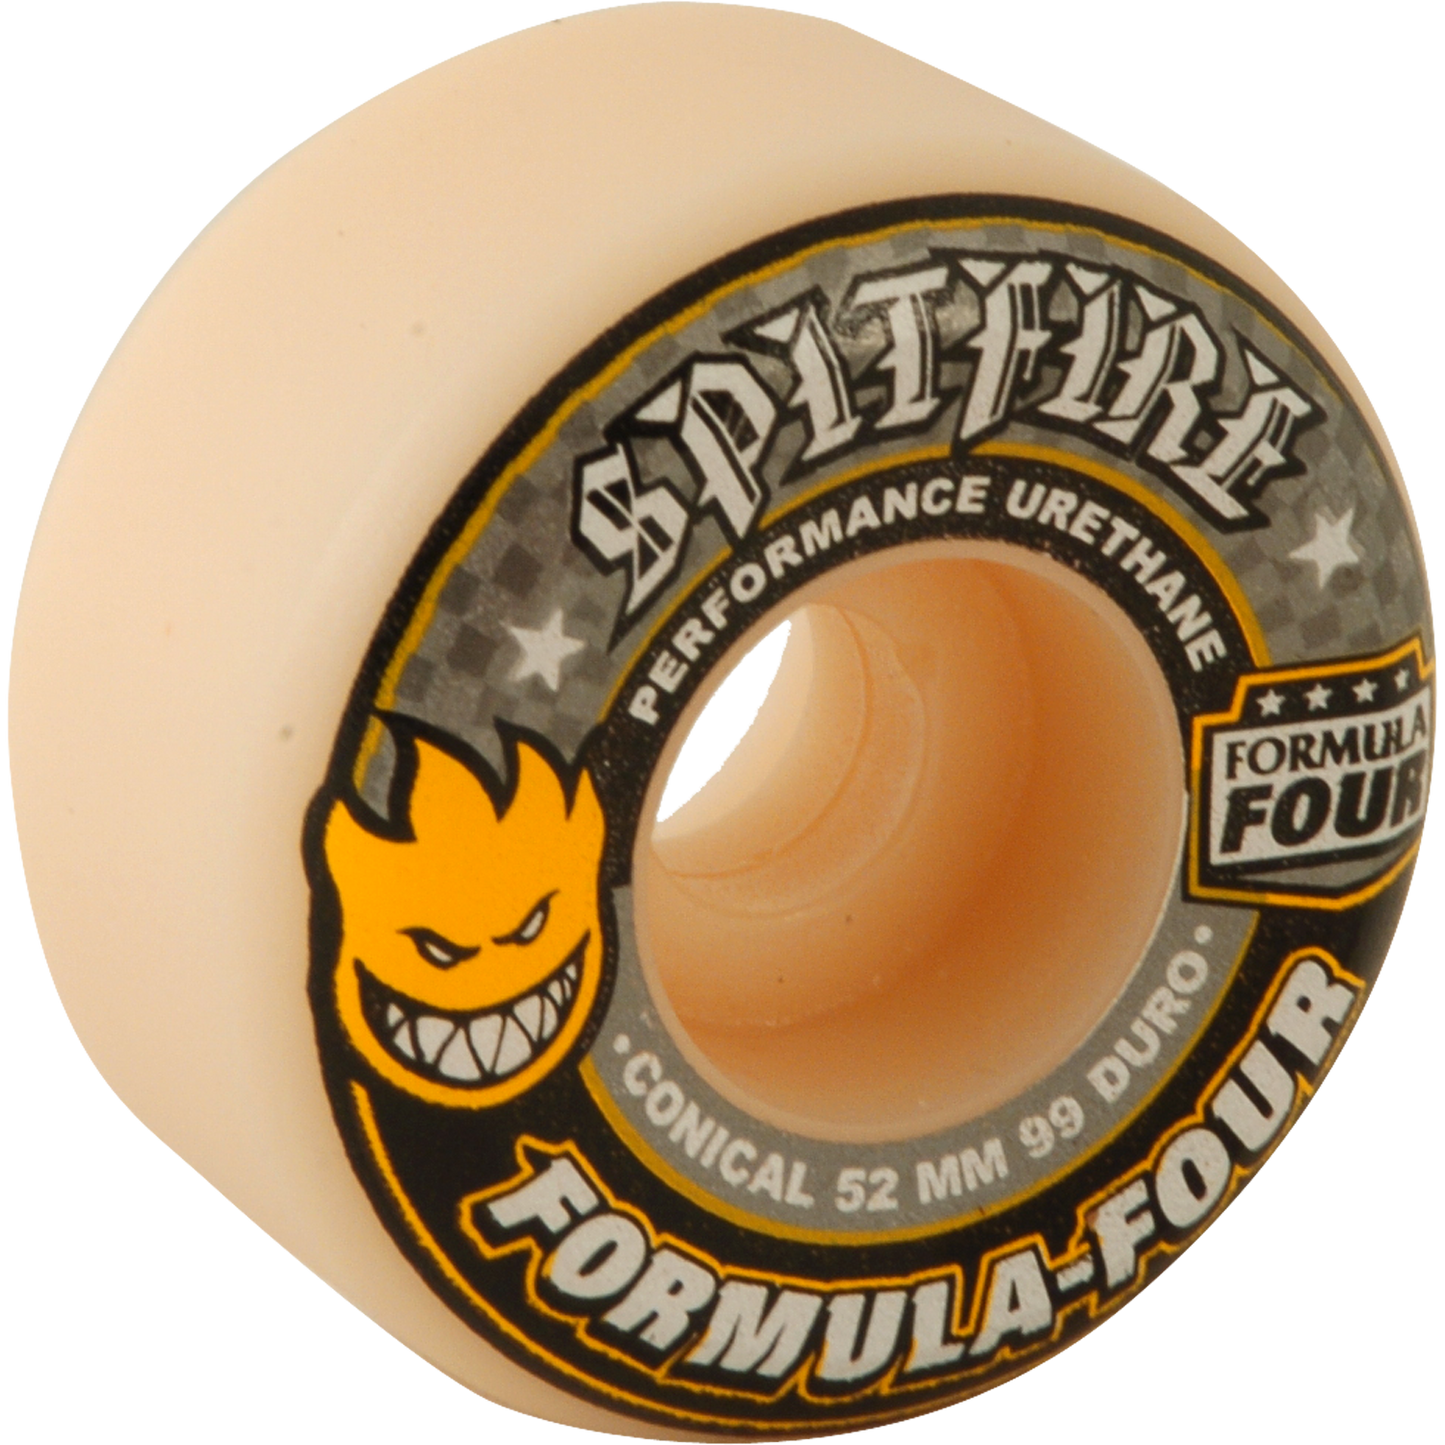 Spitfire F4 99a Conical 52mm White W/Yellow & Black Skateboard Wheels (Set of 4)